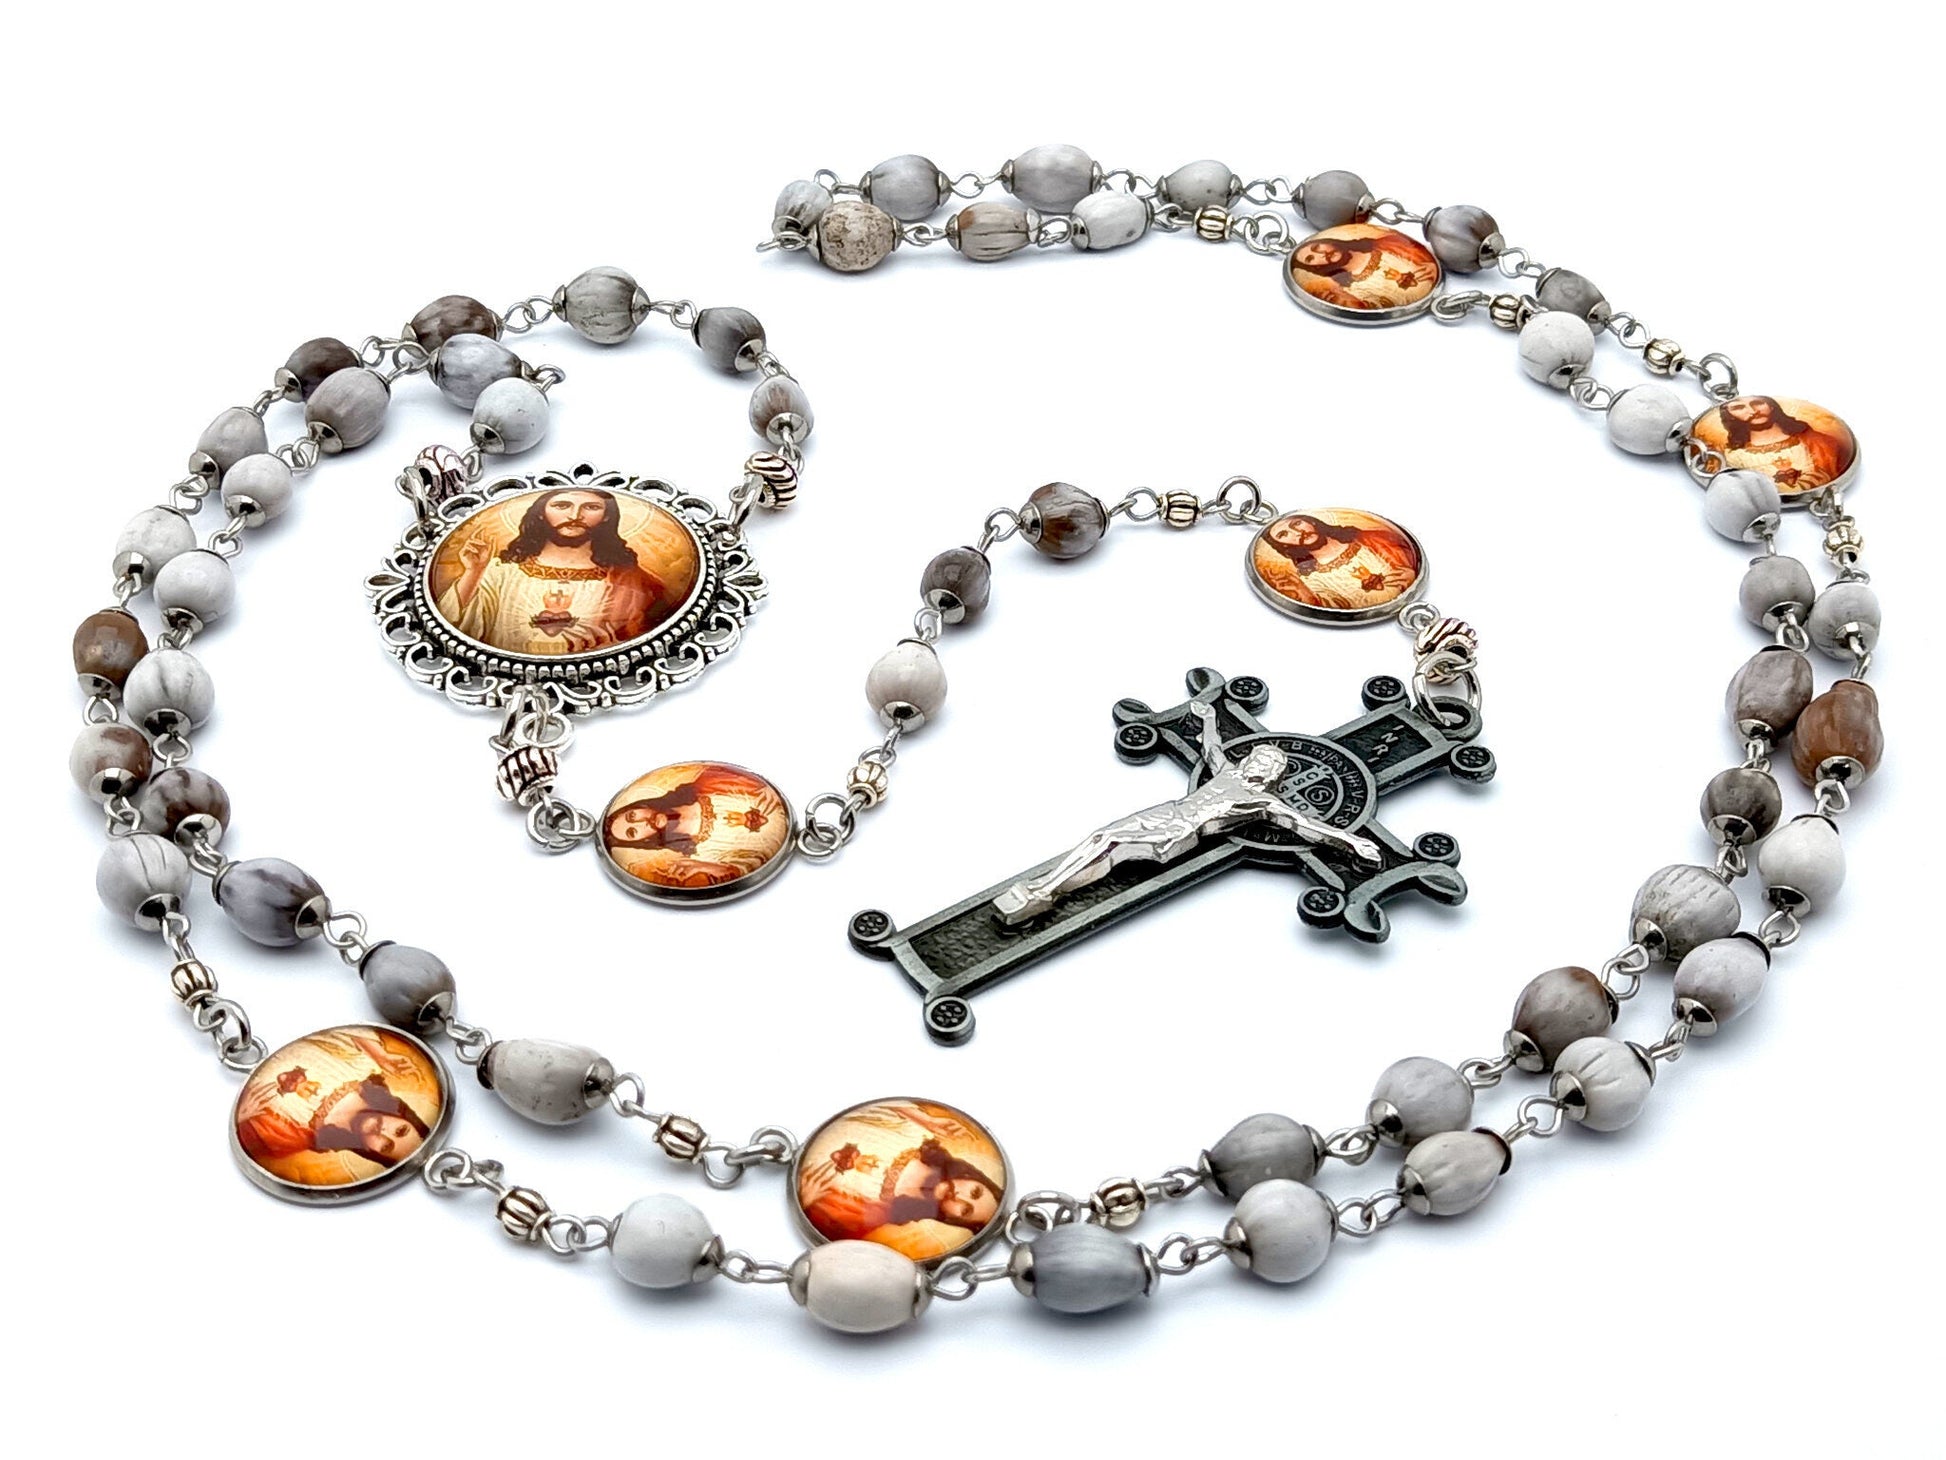 Sacred Heart of Jesus unique rosary beads Jobs tears and stainless steel rosary beads with pewter style Saint Benedict crucifix.